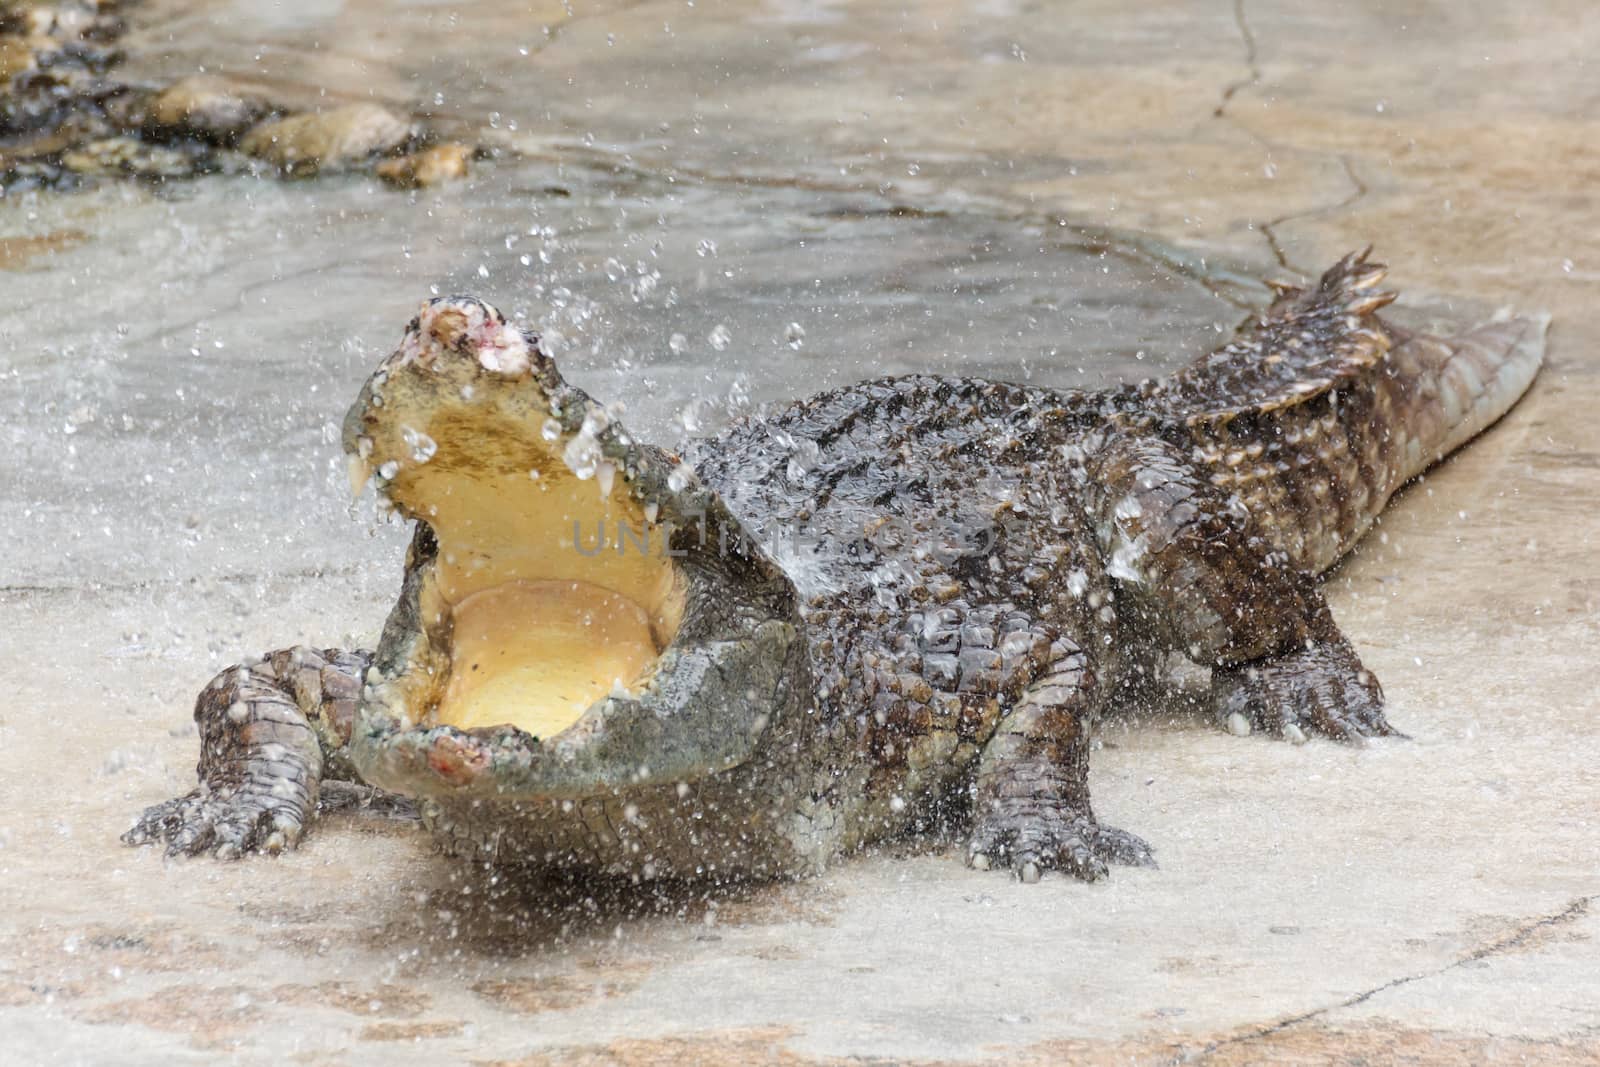 Crocodile open mouth with spray water